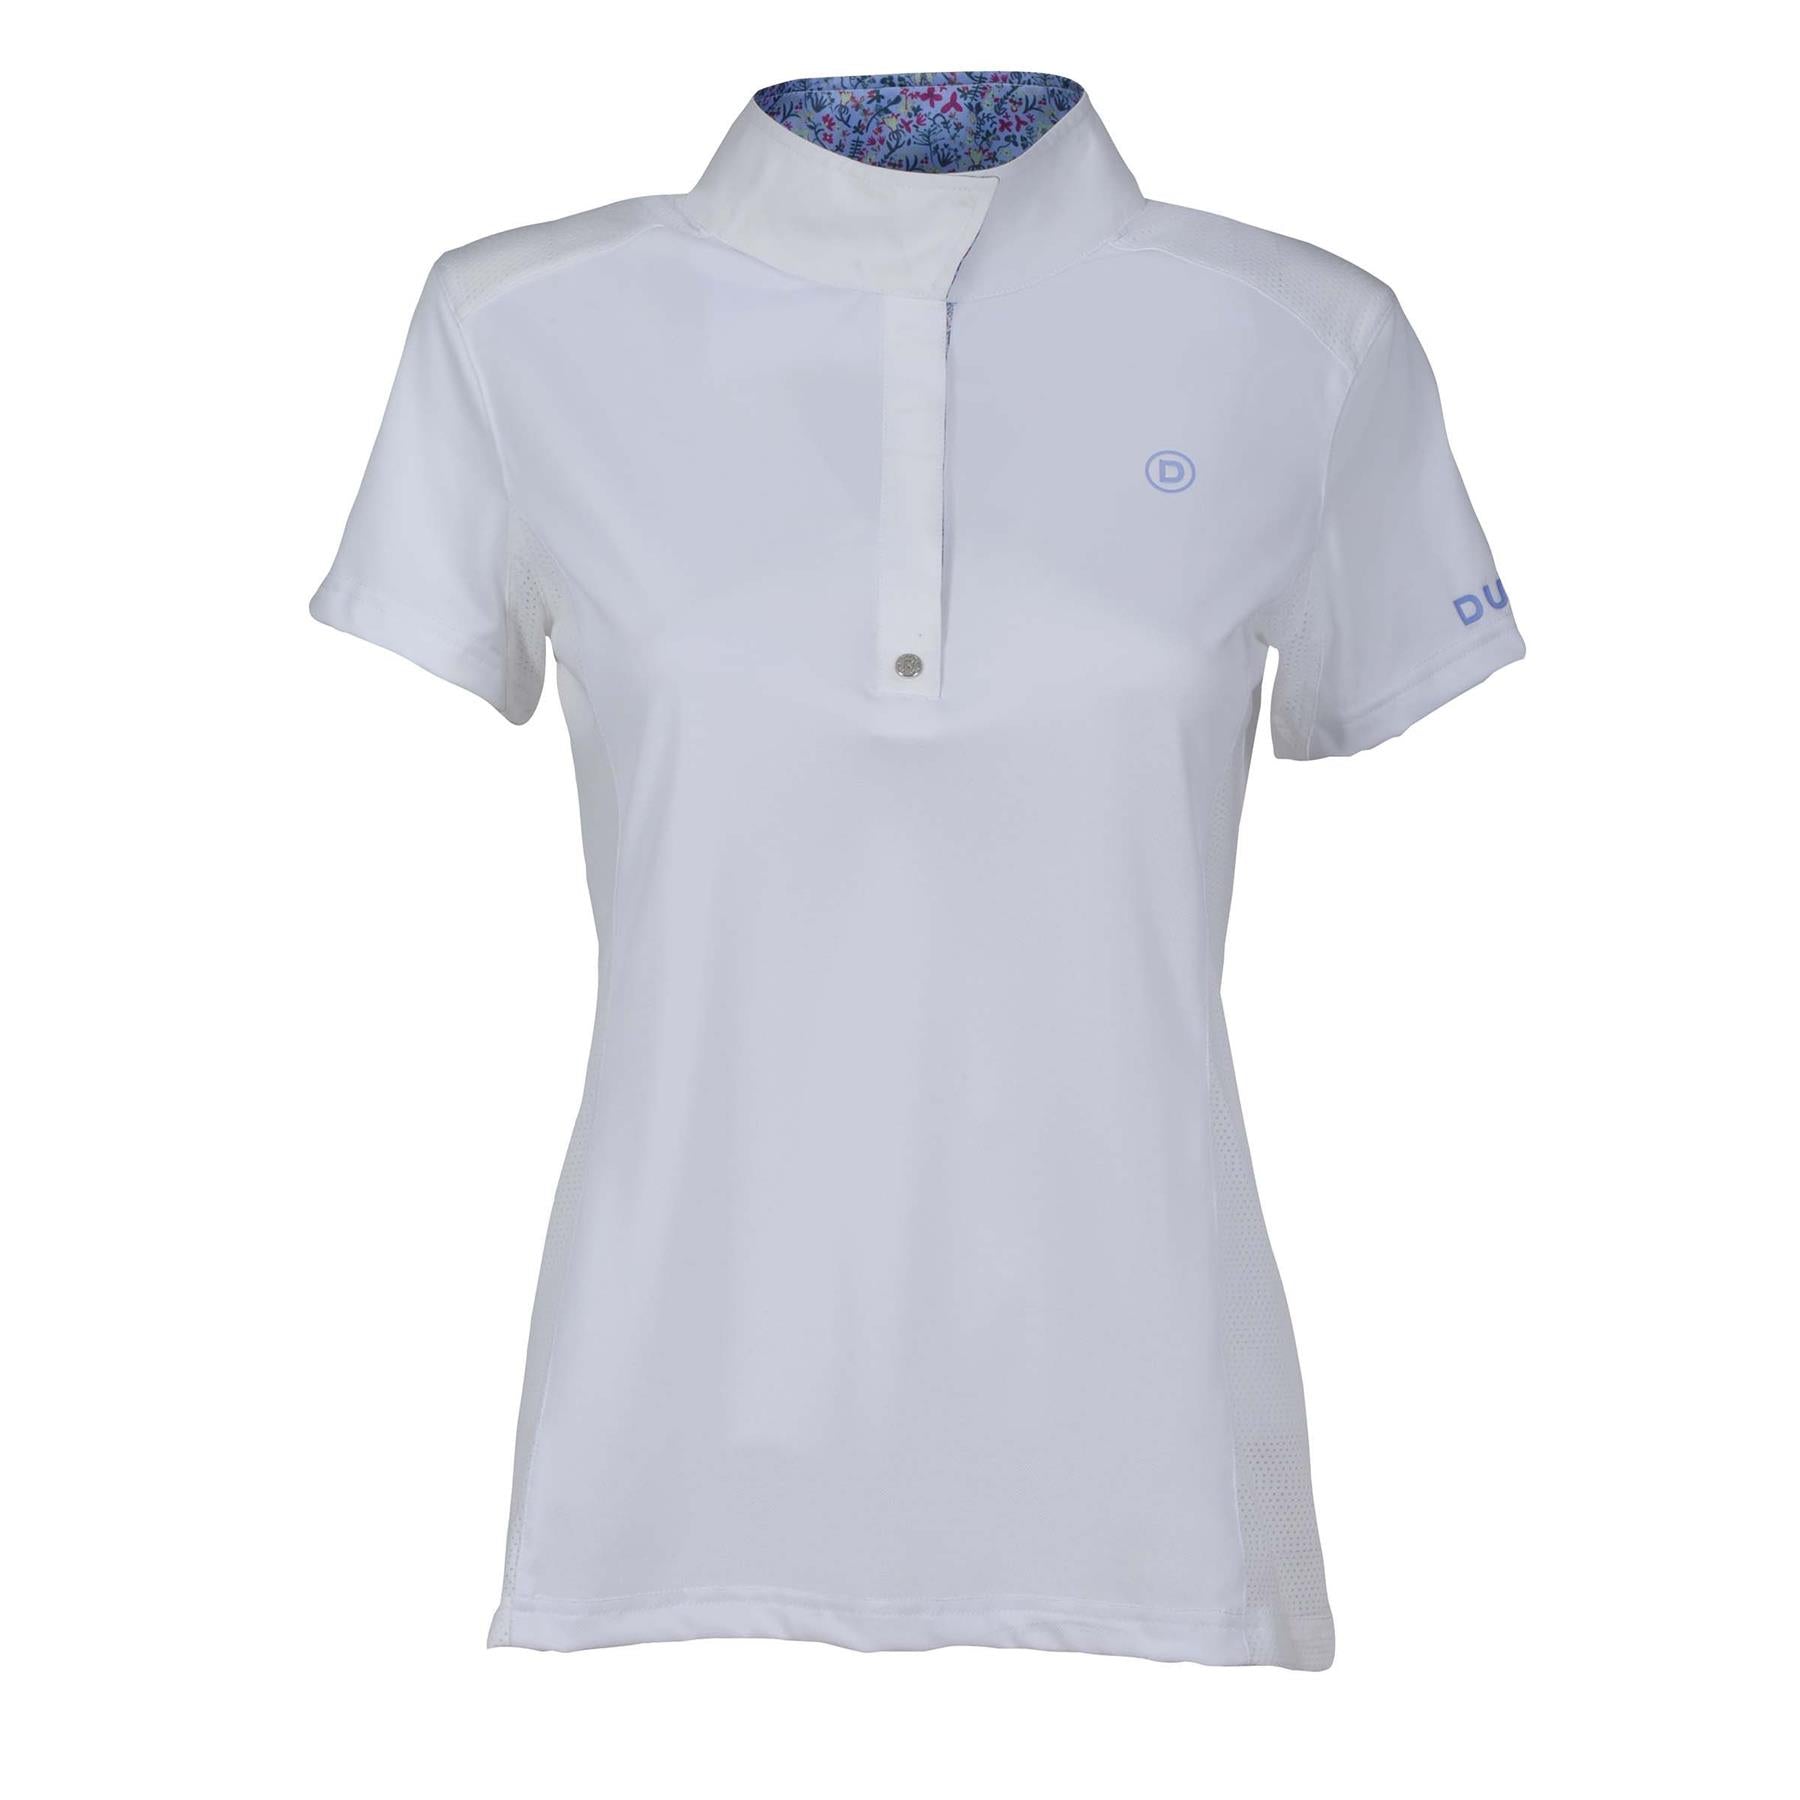 Dublin Andrea Short Sleeve Competition Printed Inner Collar Shirt - Just Horse Riders